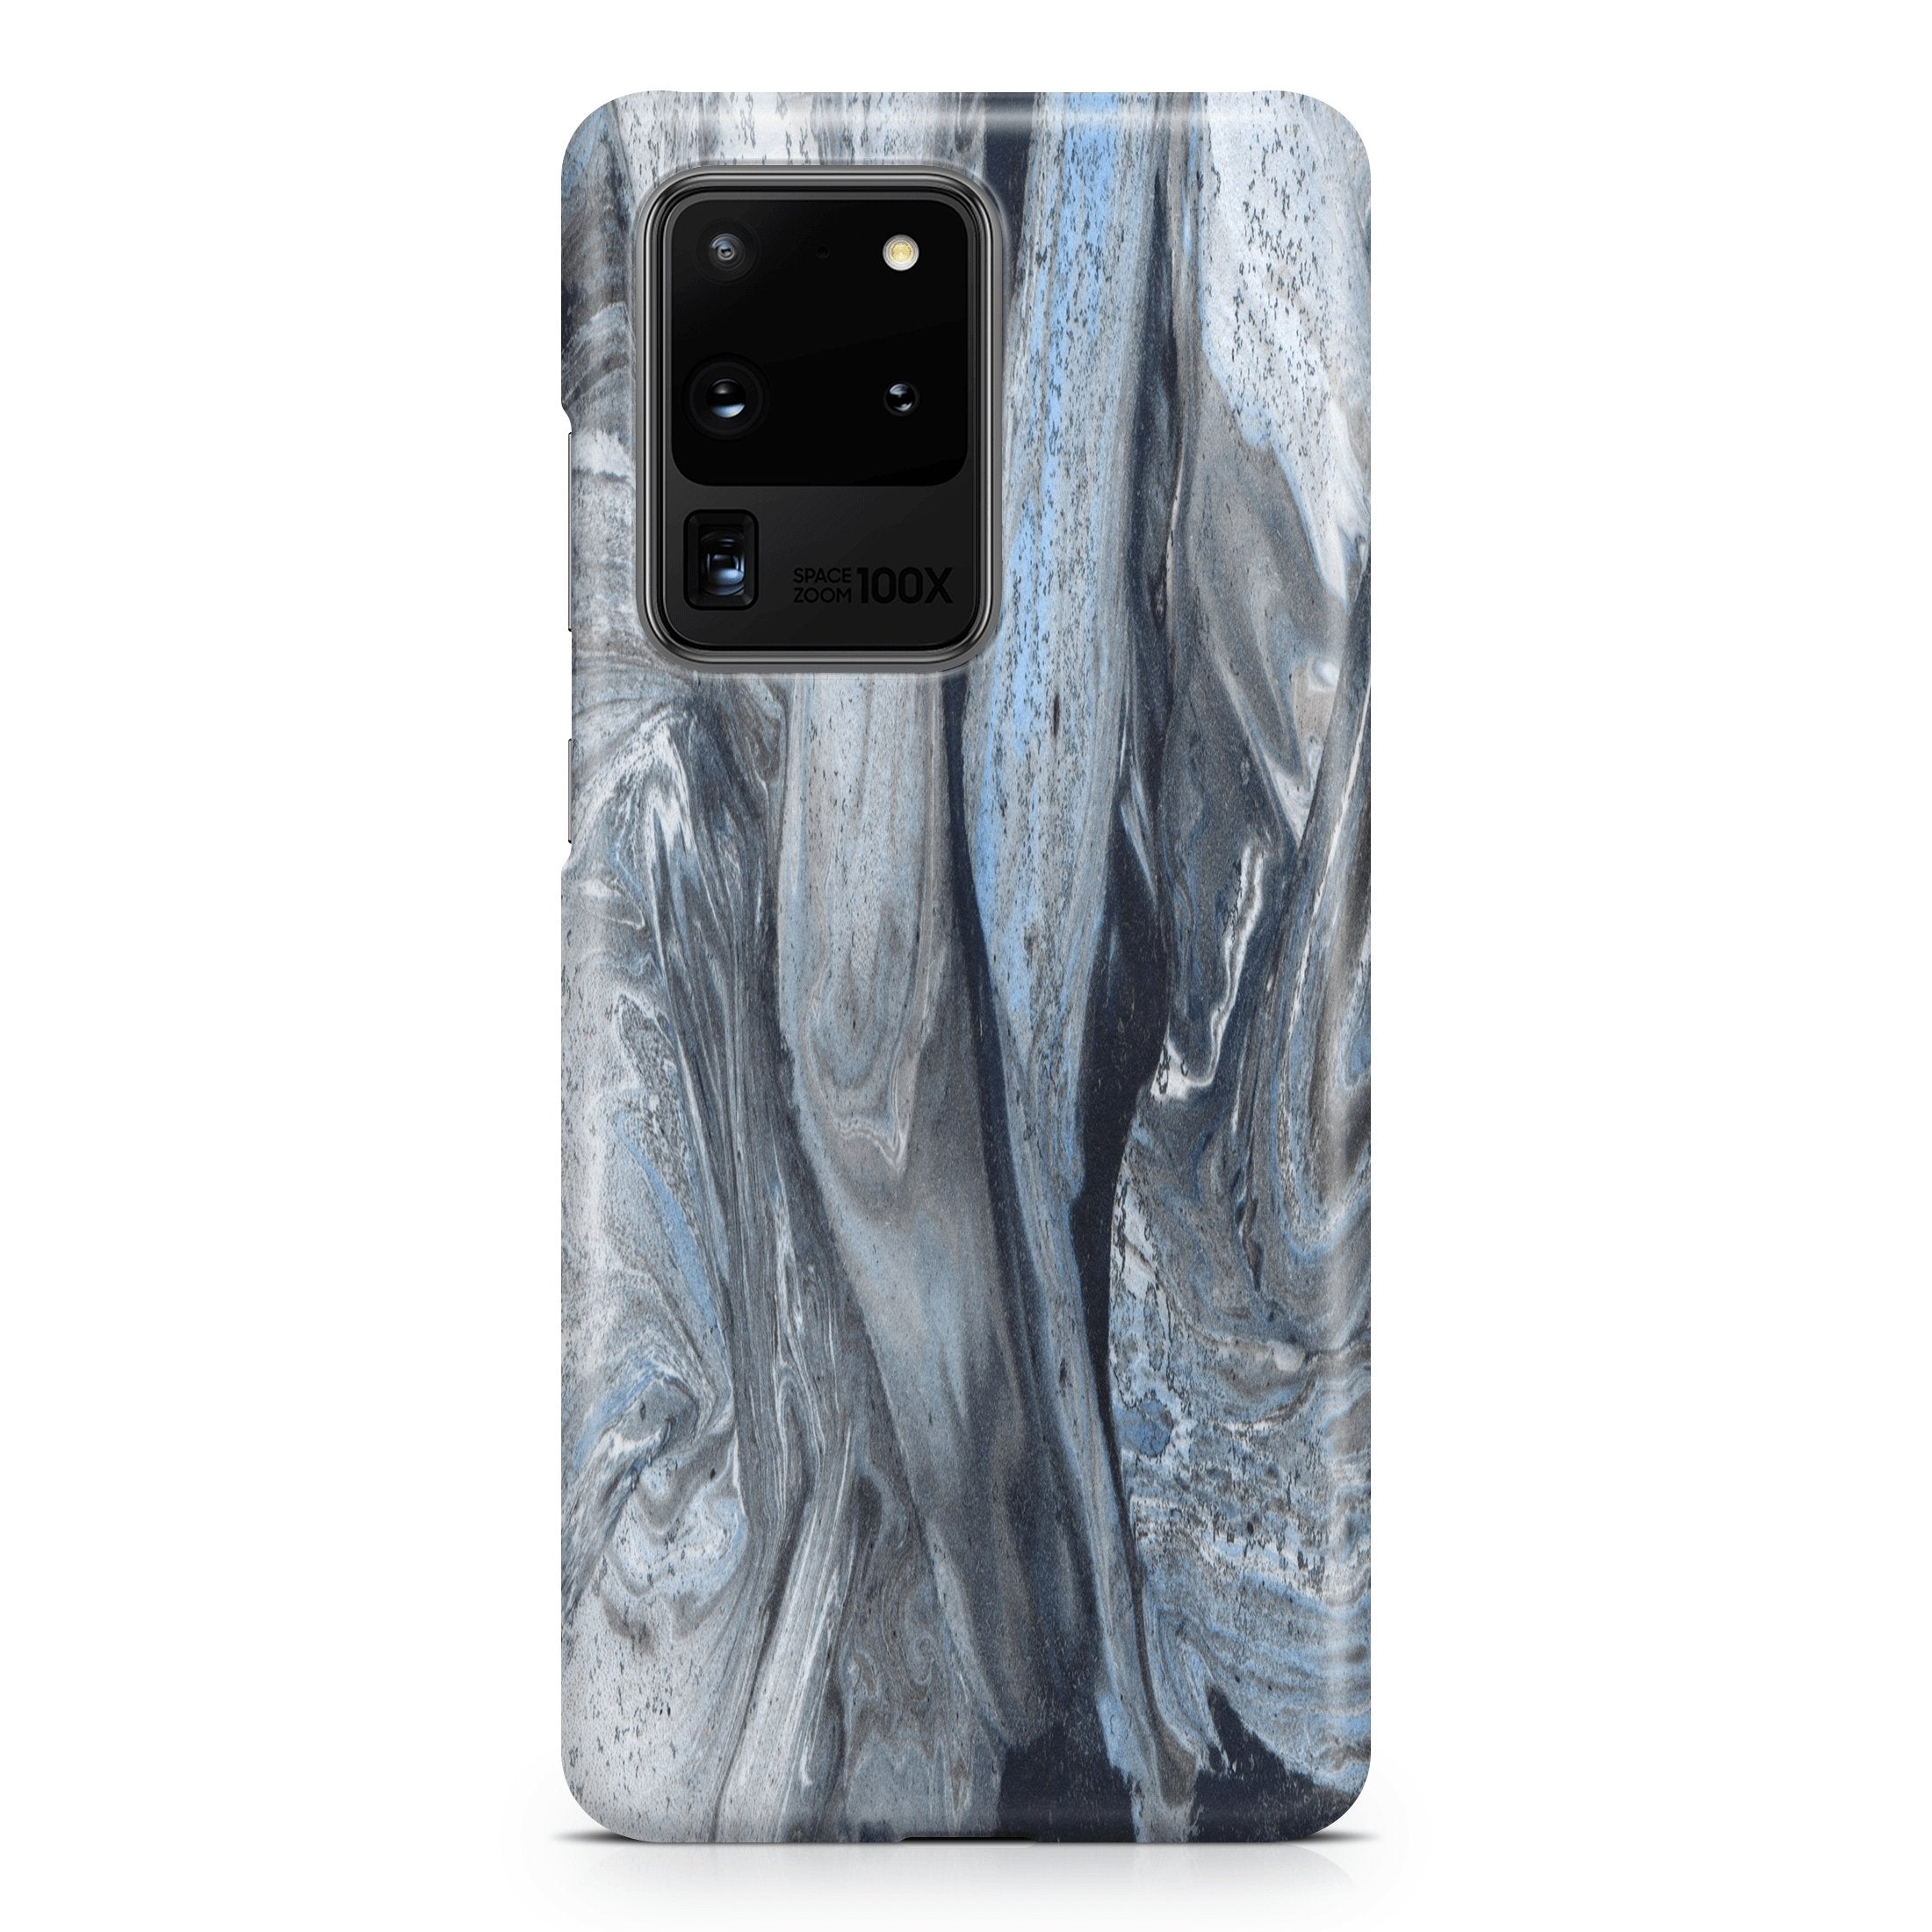 Black & White Marble Series II - Samsung phone case designs by CaseSwagger